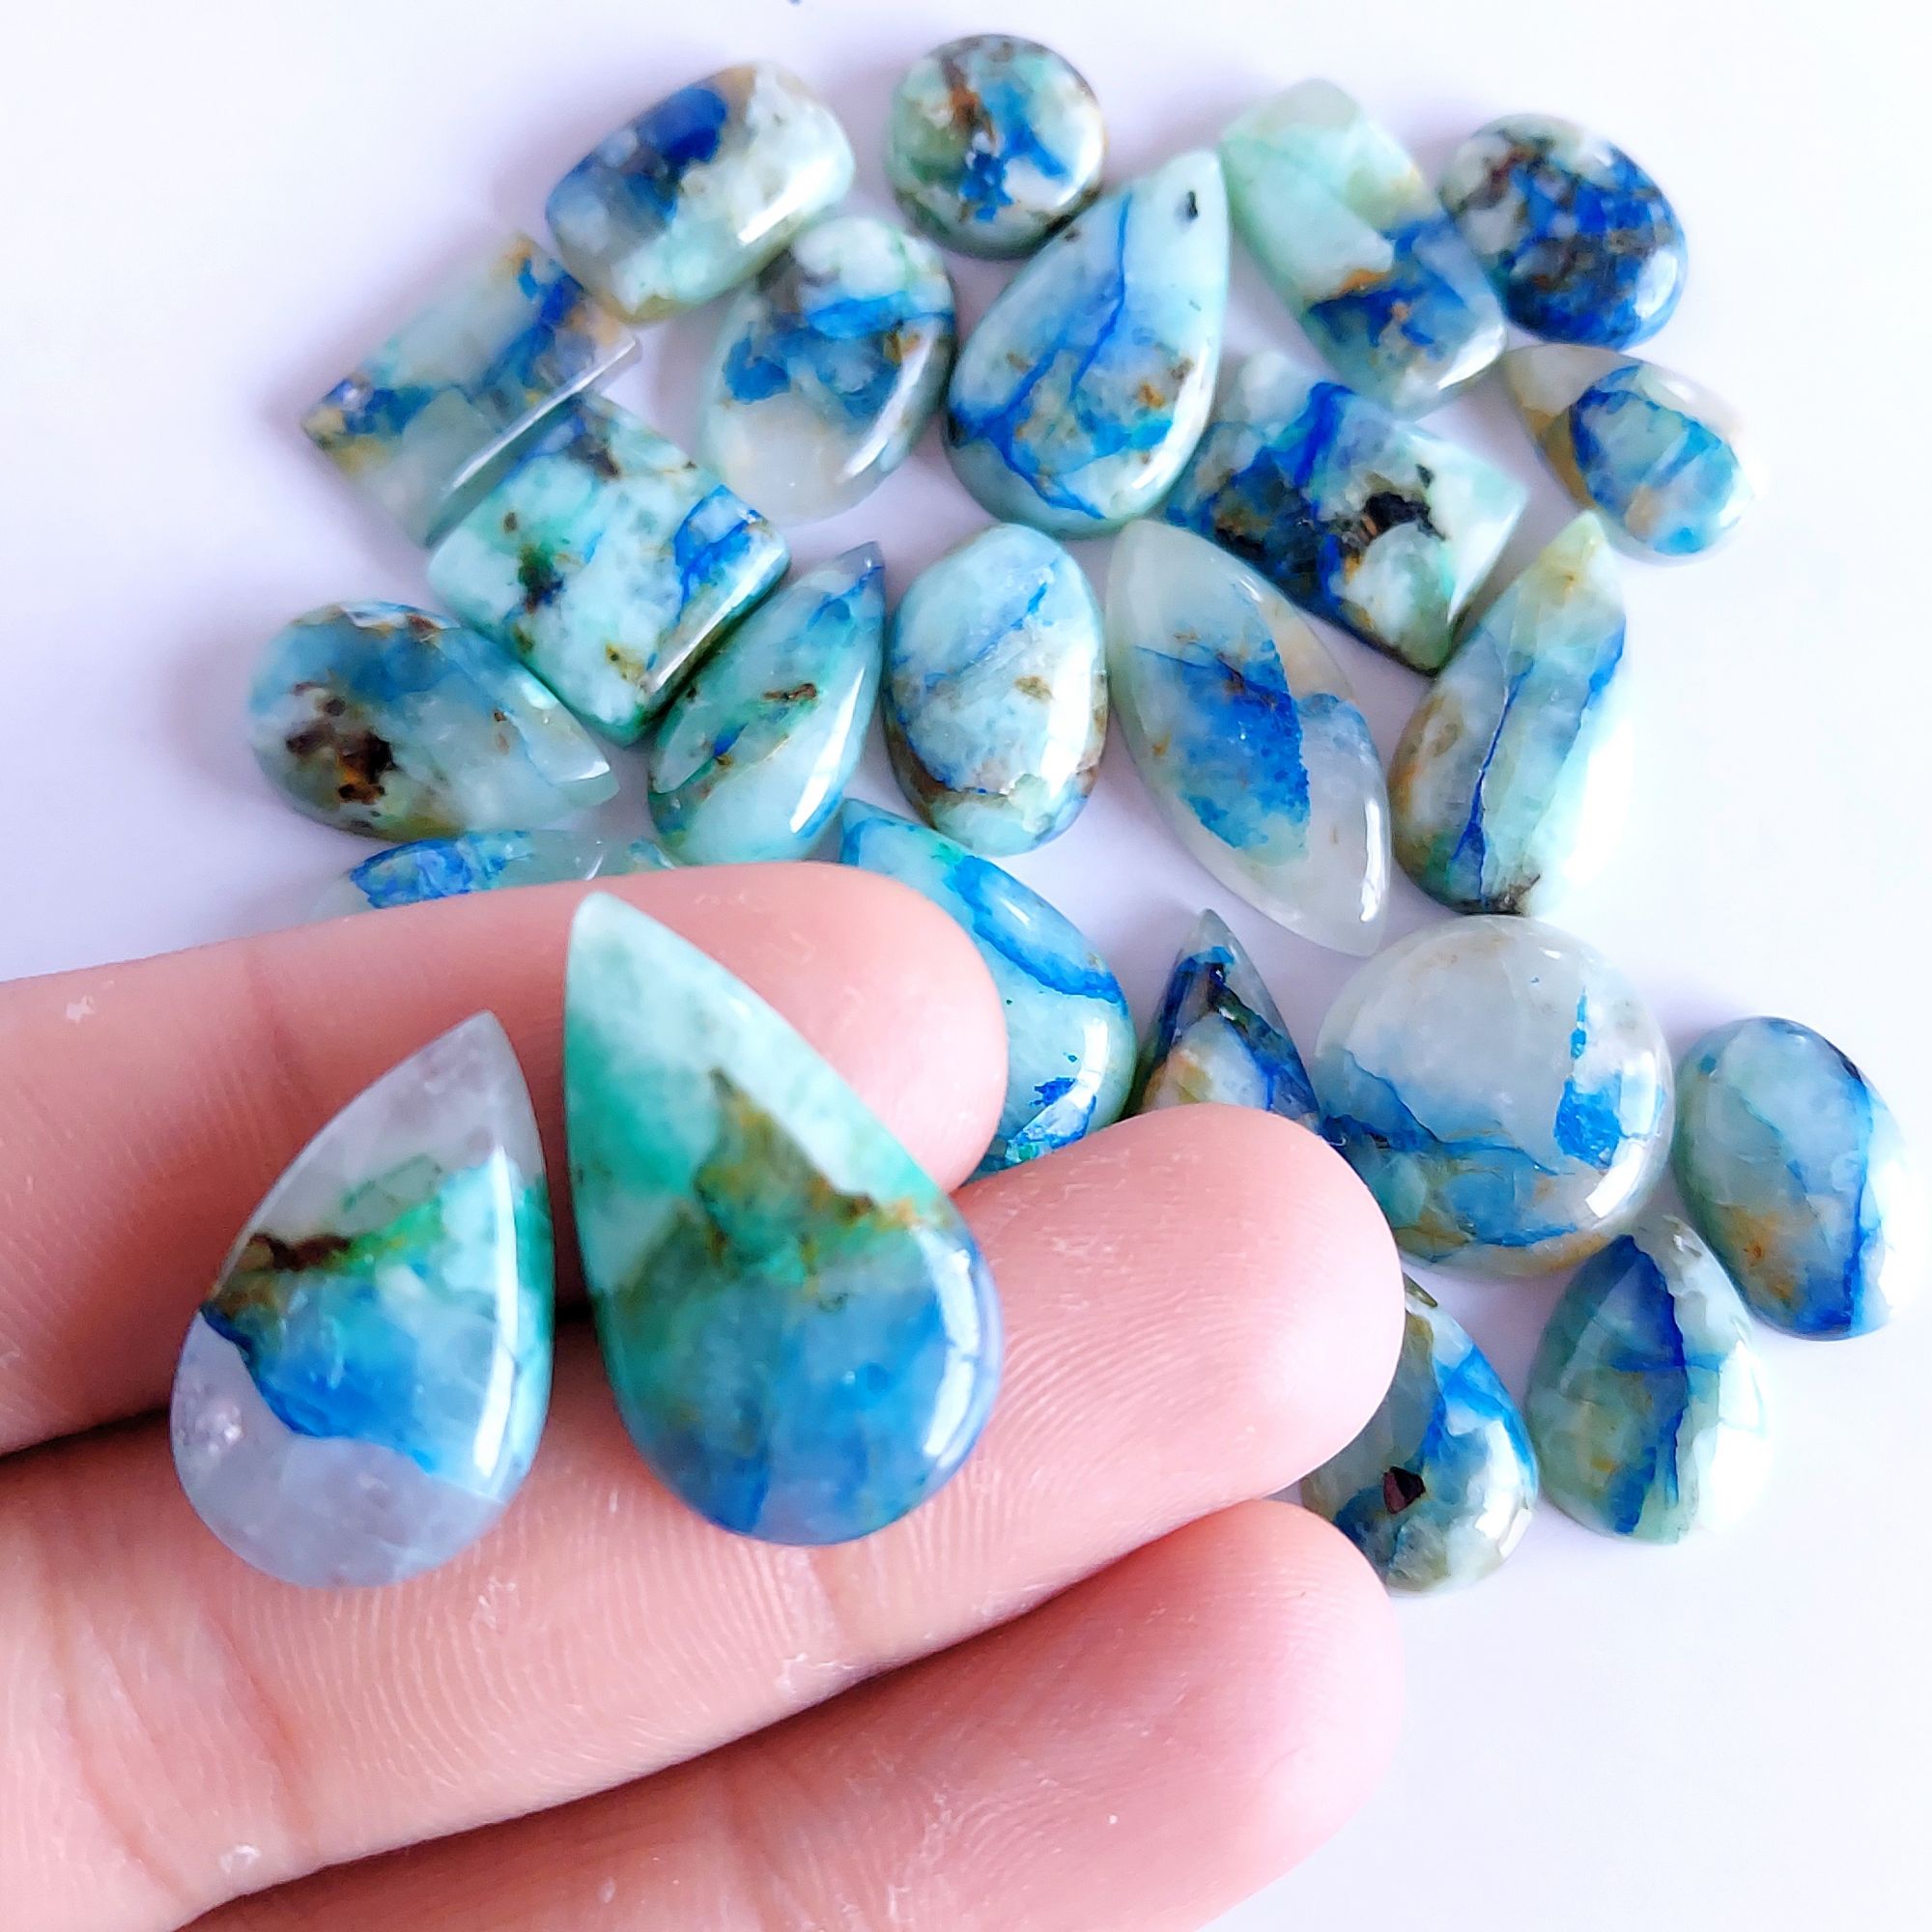 268.Cts 28 Pcs Natural Smooth Azurite Mix Loose Gemstone Cabochon Lot Size 25x14 12x12mm Wholesale Gemstone For jewelry